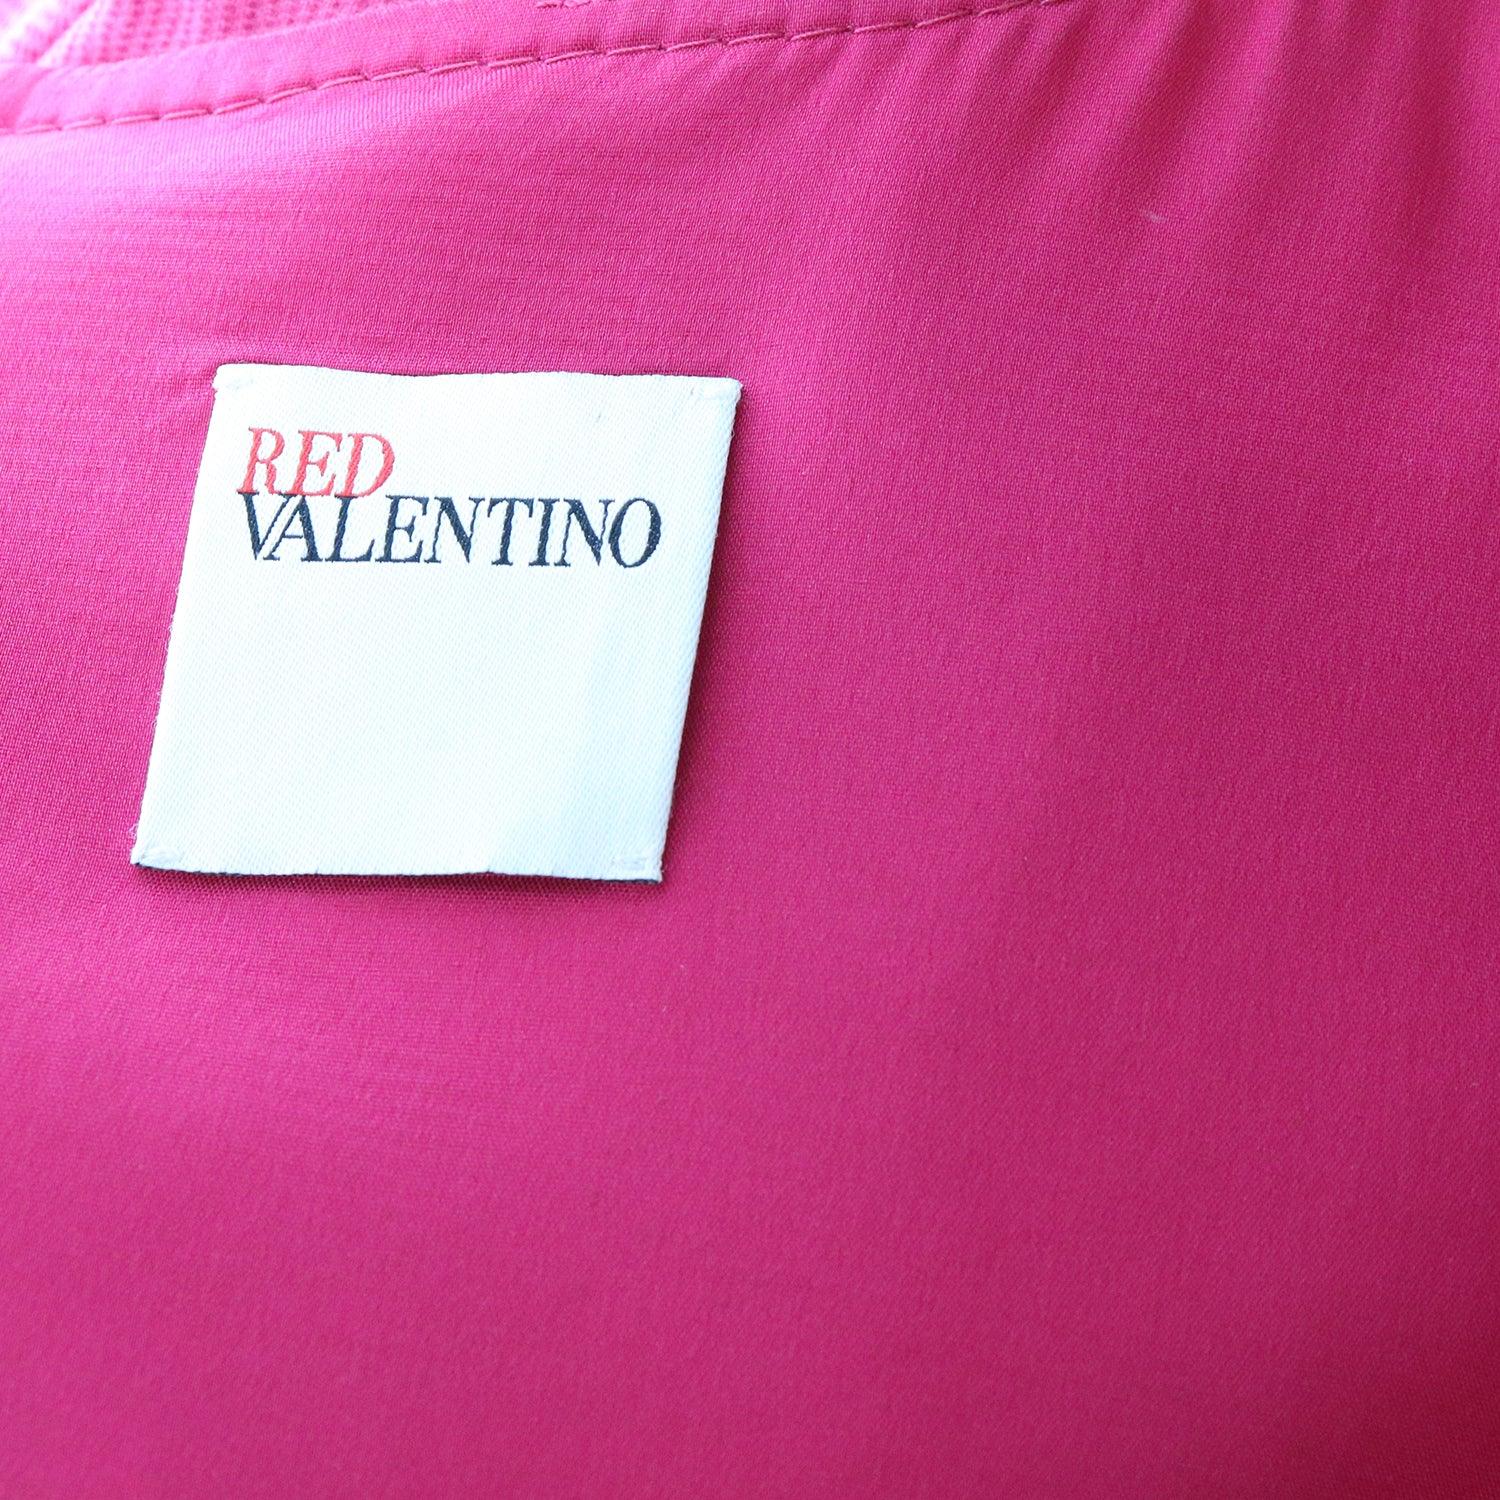 Valentino Red Dress - Women's 48 - Fashionably Yours